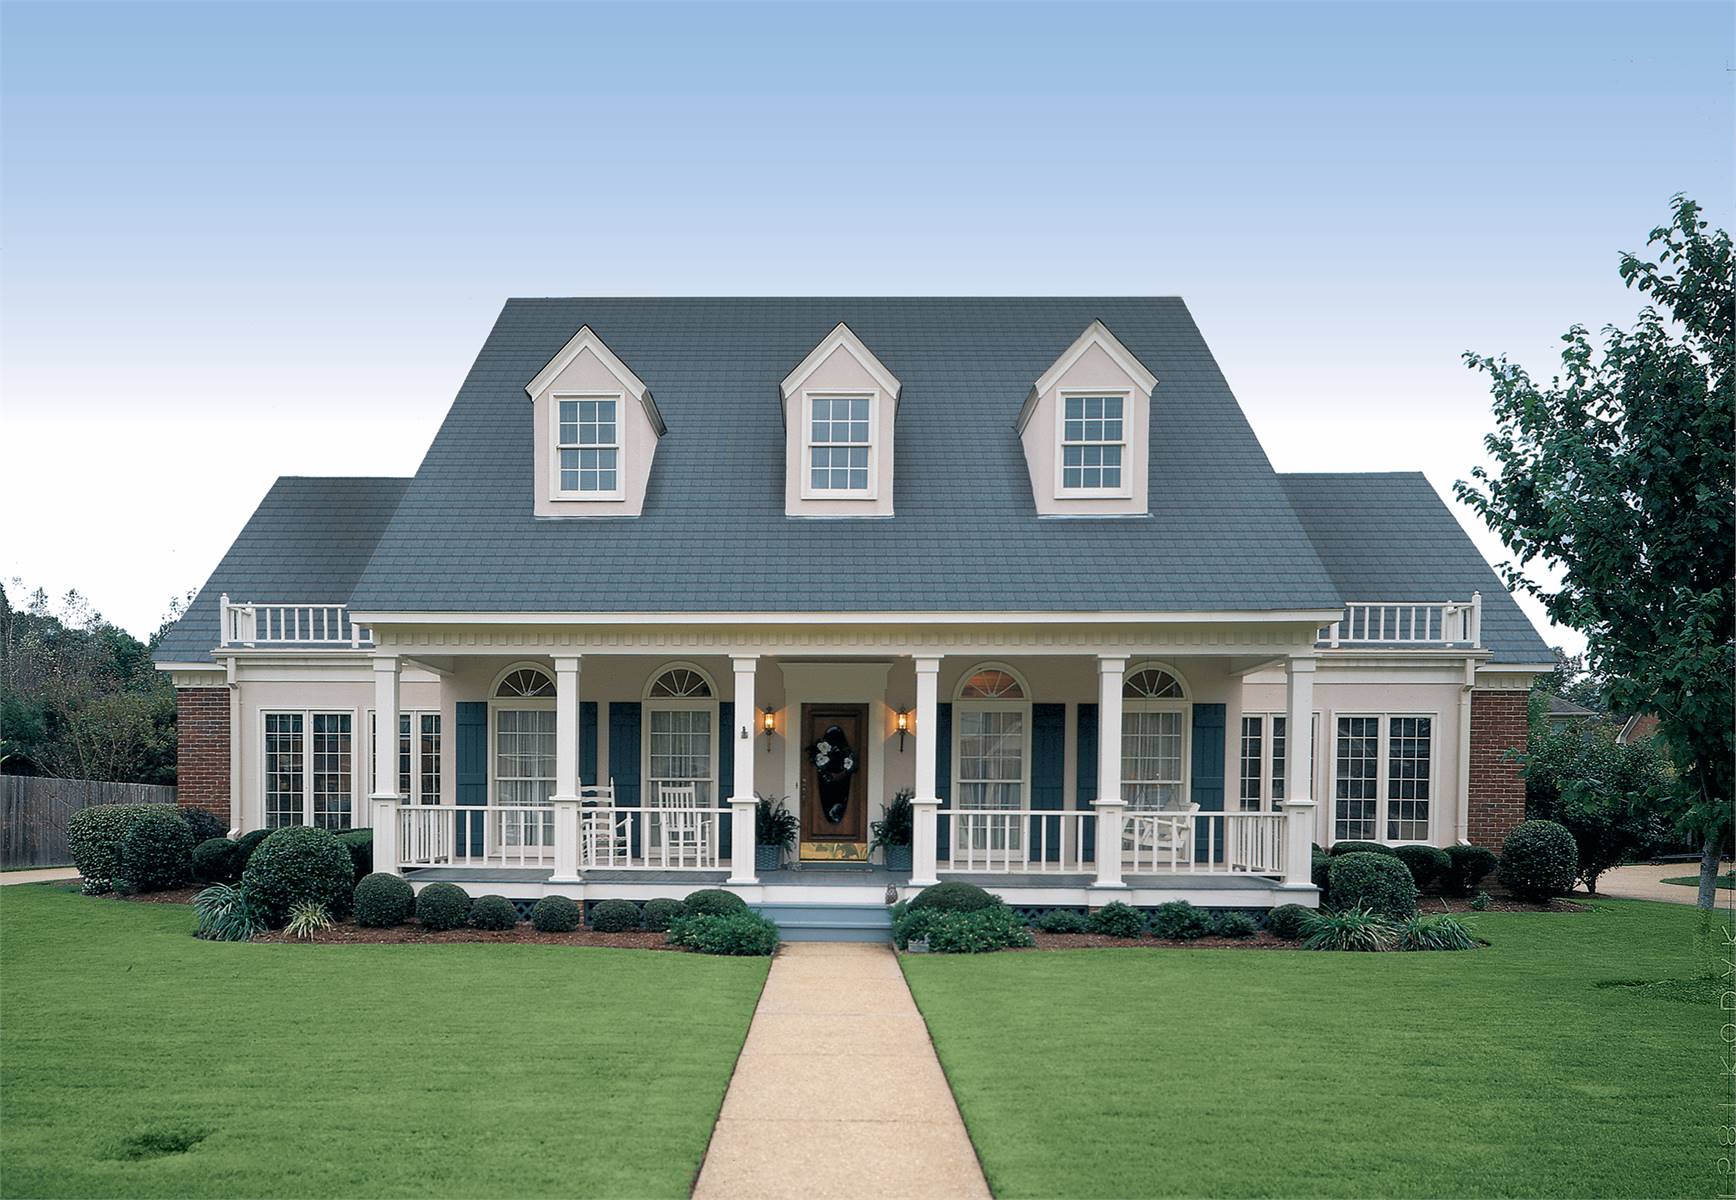 Two Story Traditional Country with Dormers & Front Porch image of Banner Hall-3000 House Plan